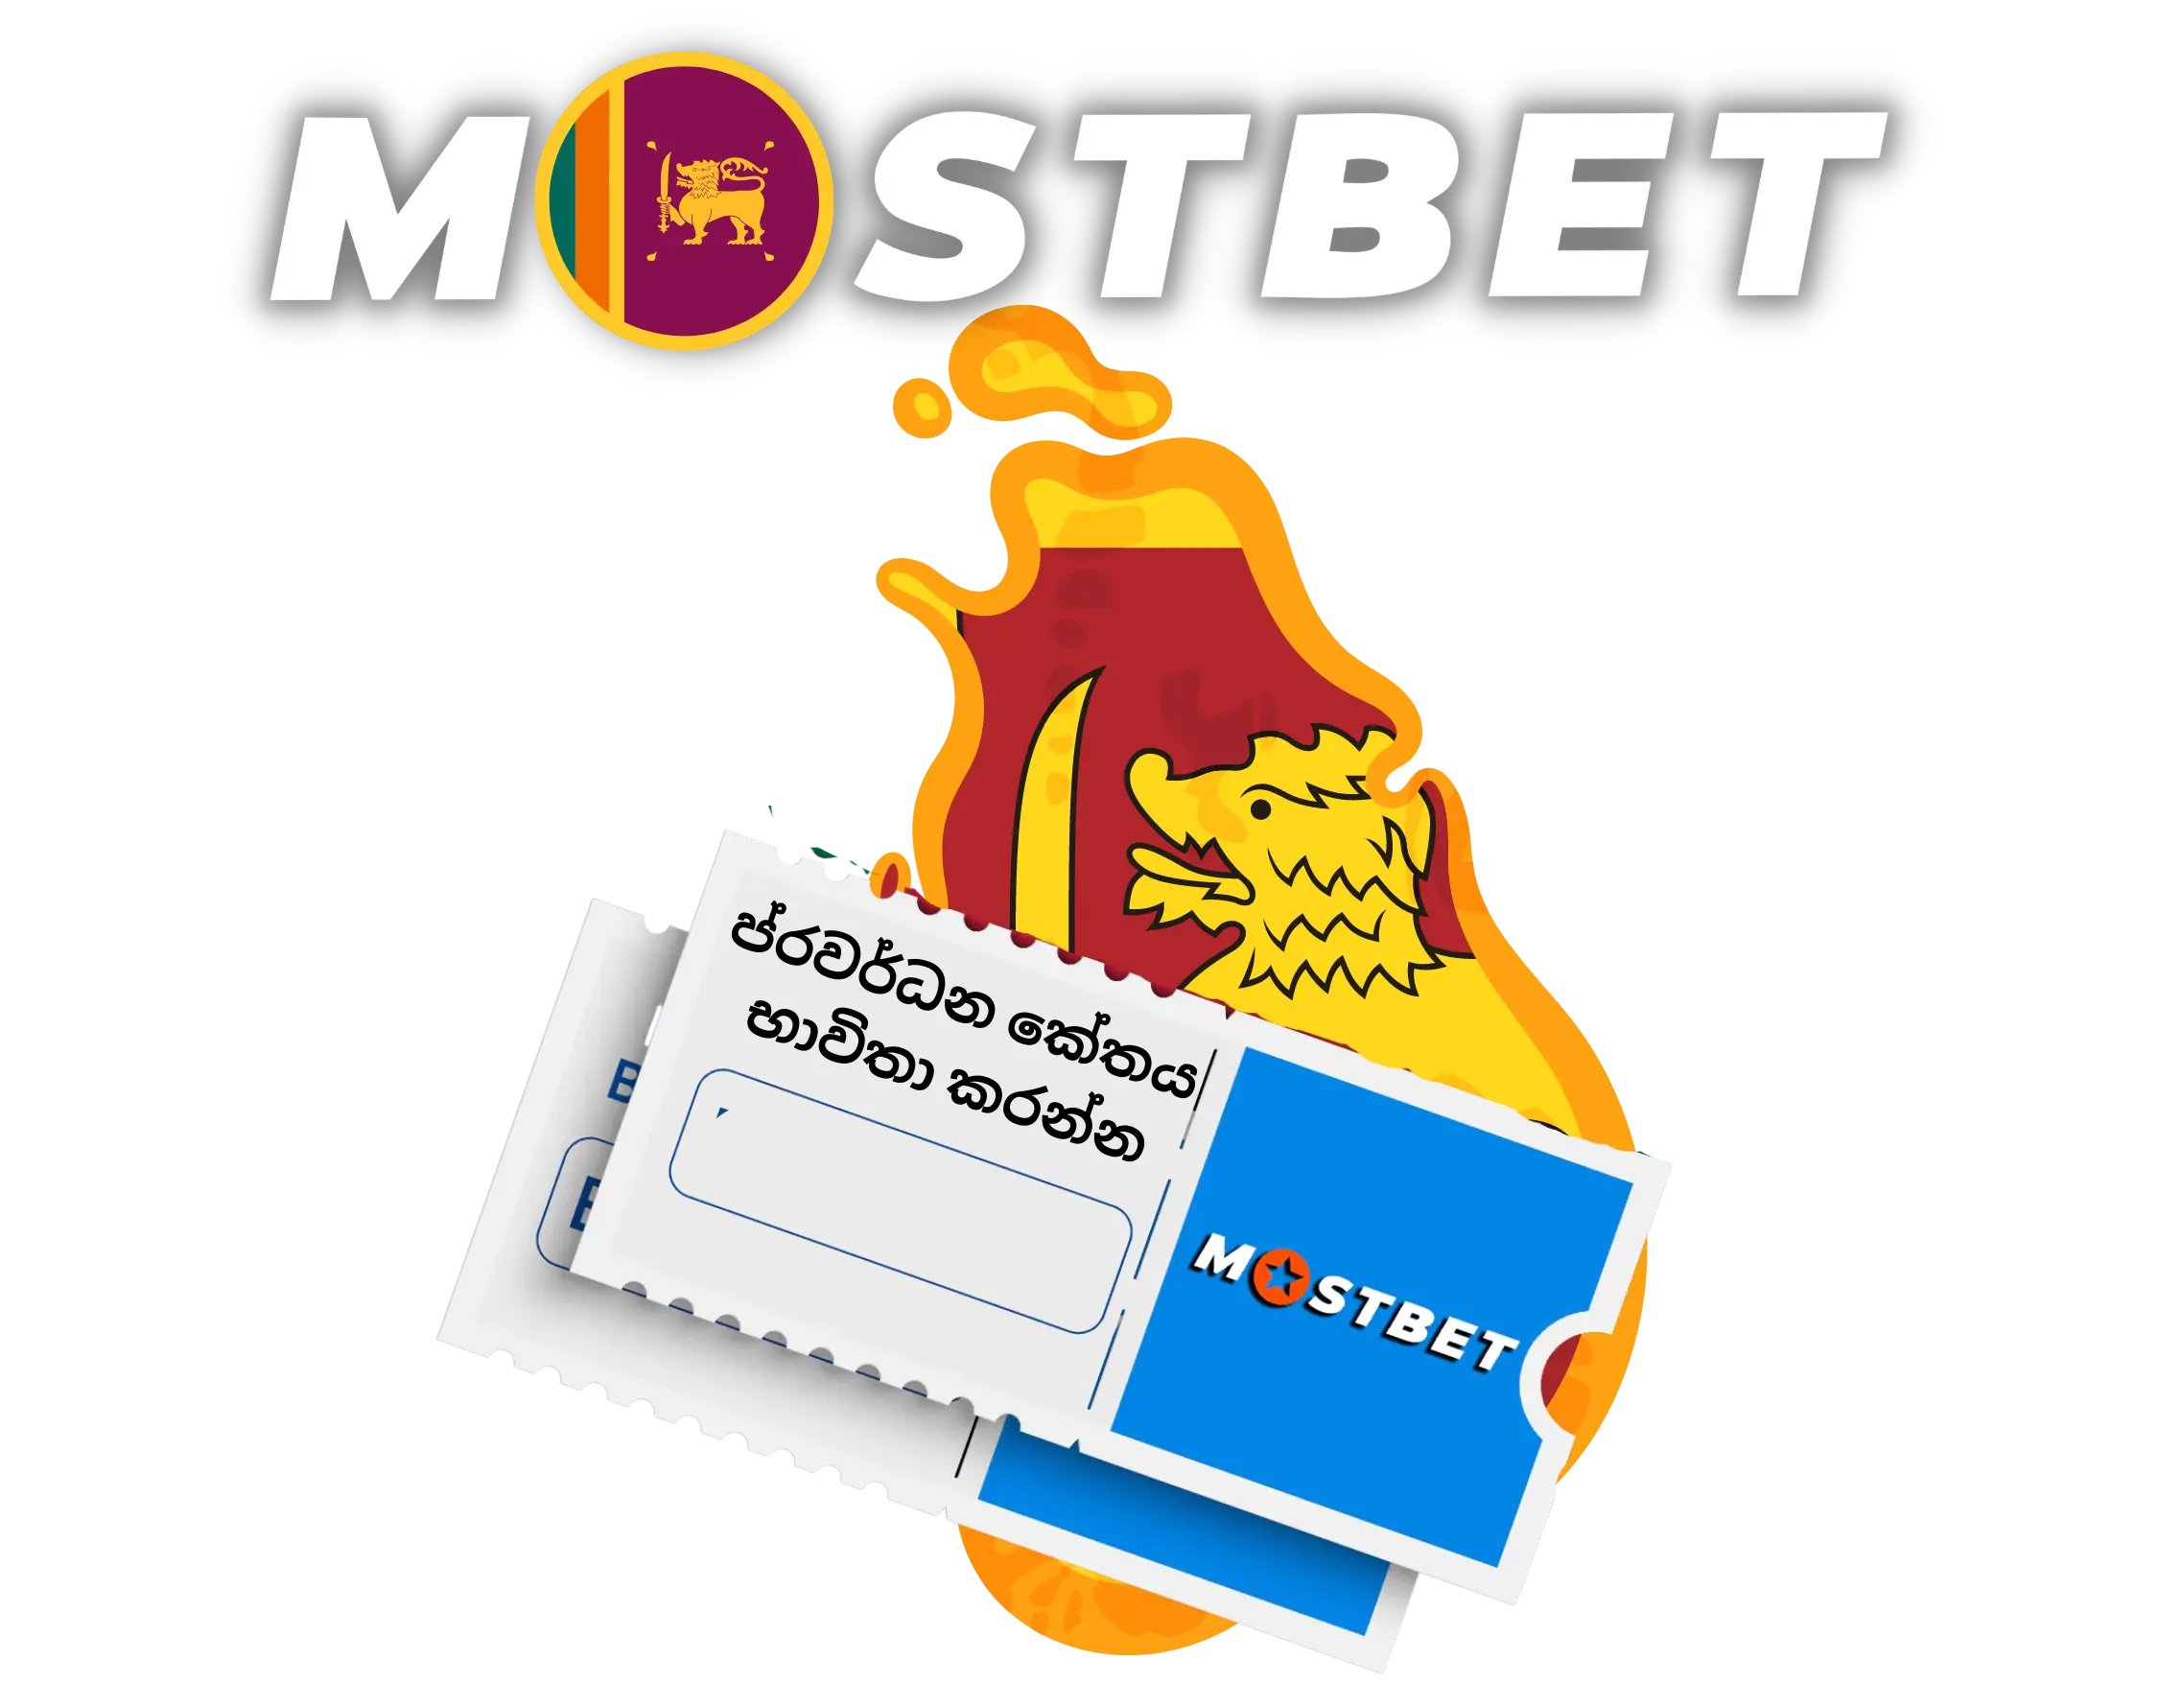 25 Best Things About Mostbet Betting Company and Casino in Egypt